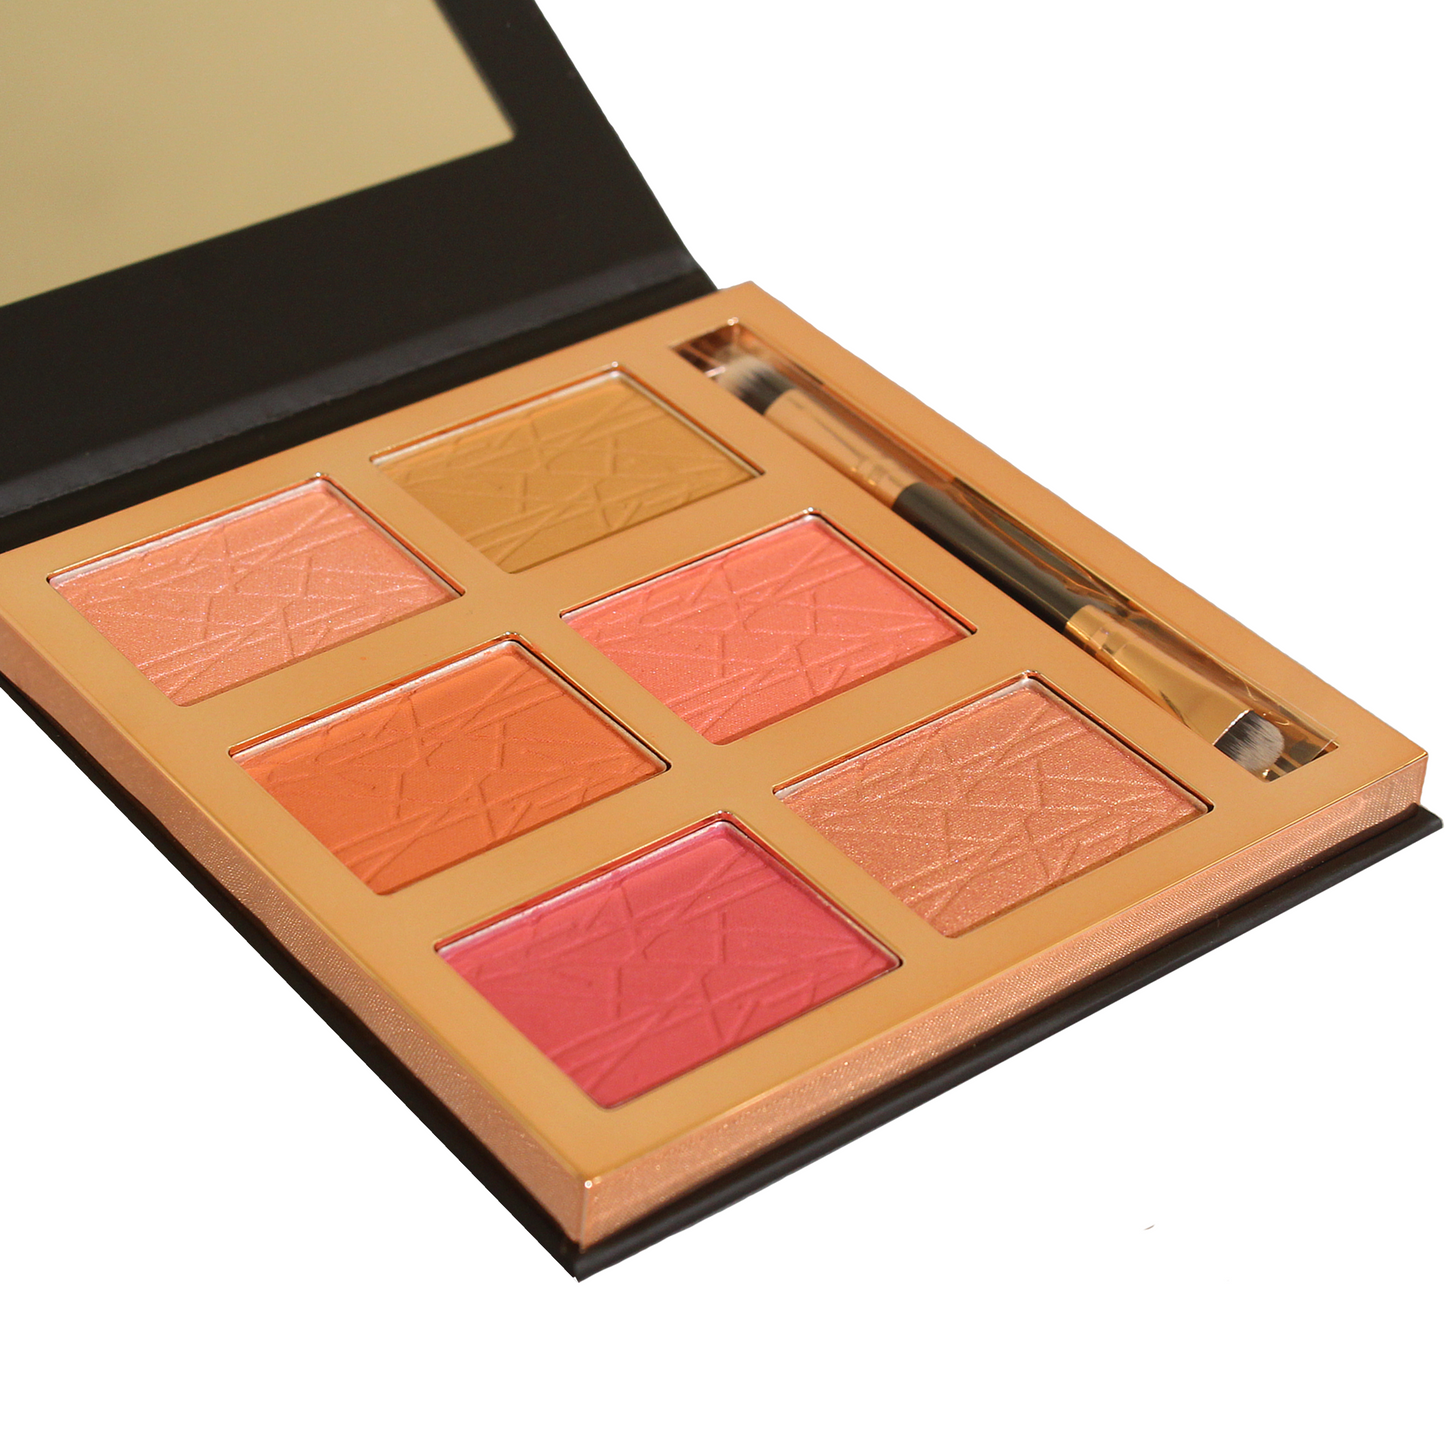 FACE PALETTE HIGHLIGHTERS 50